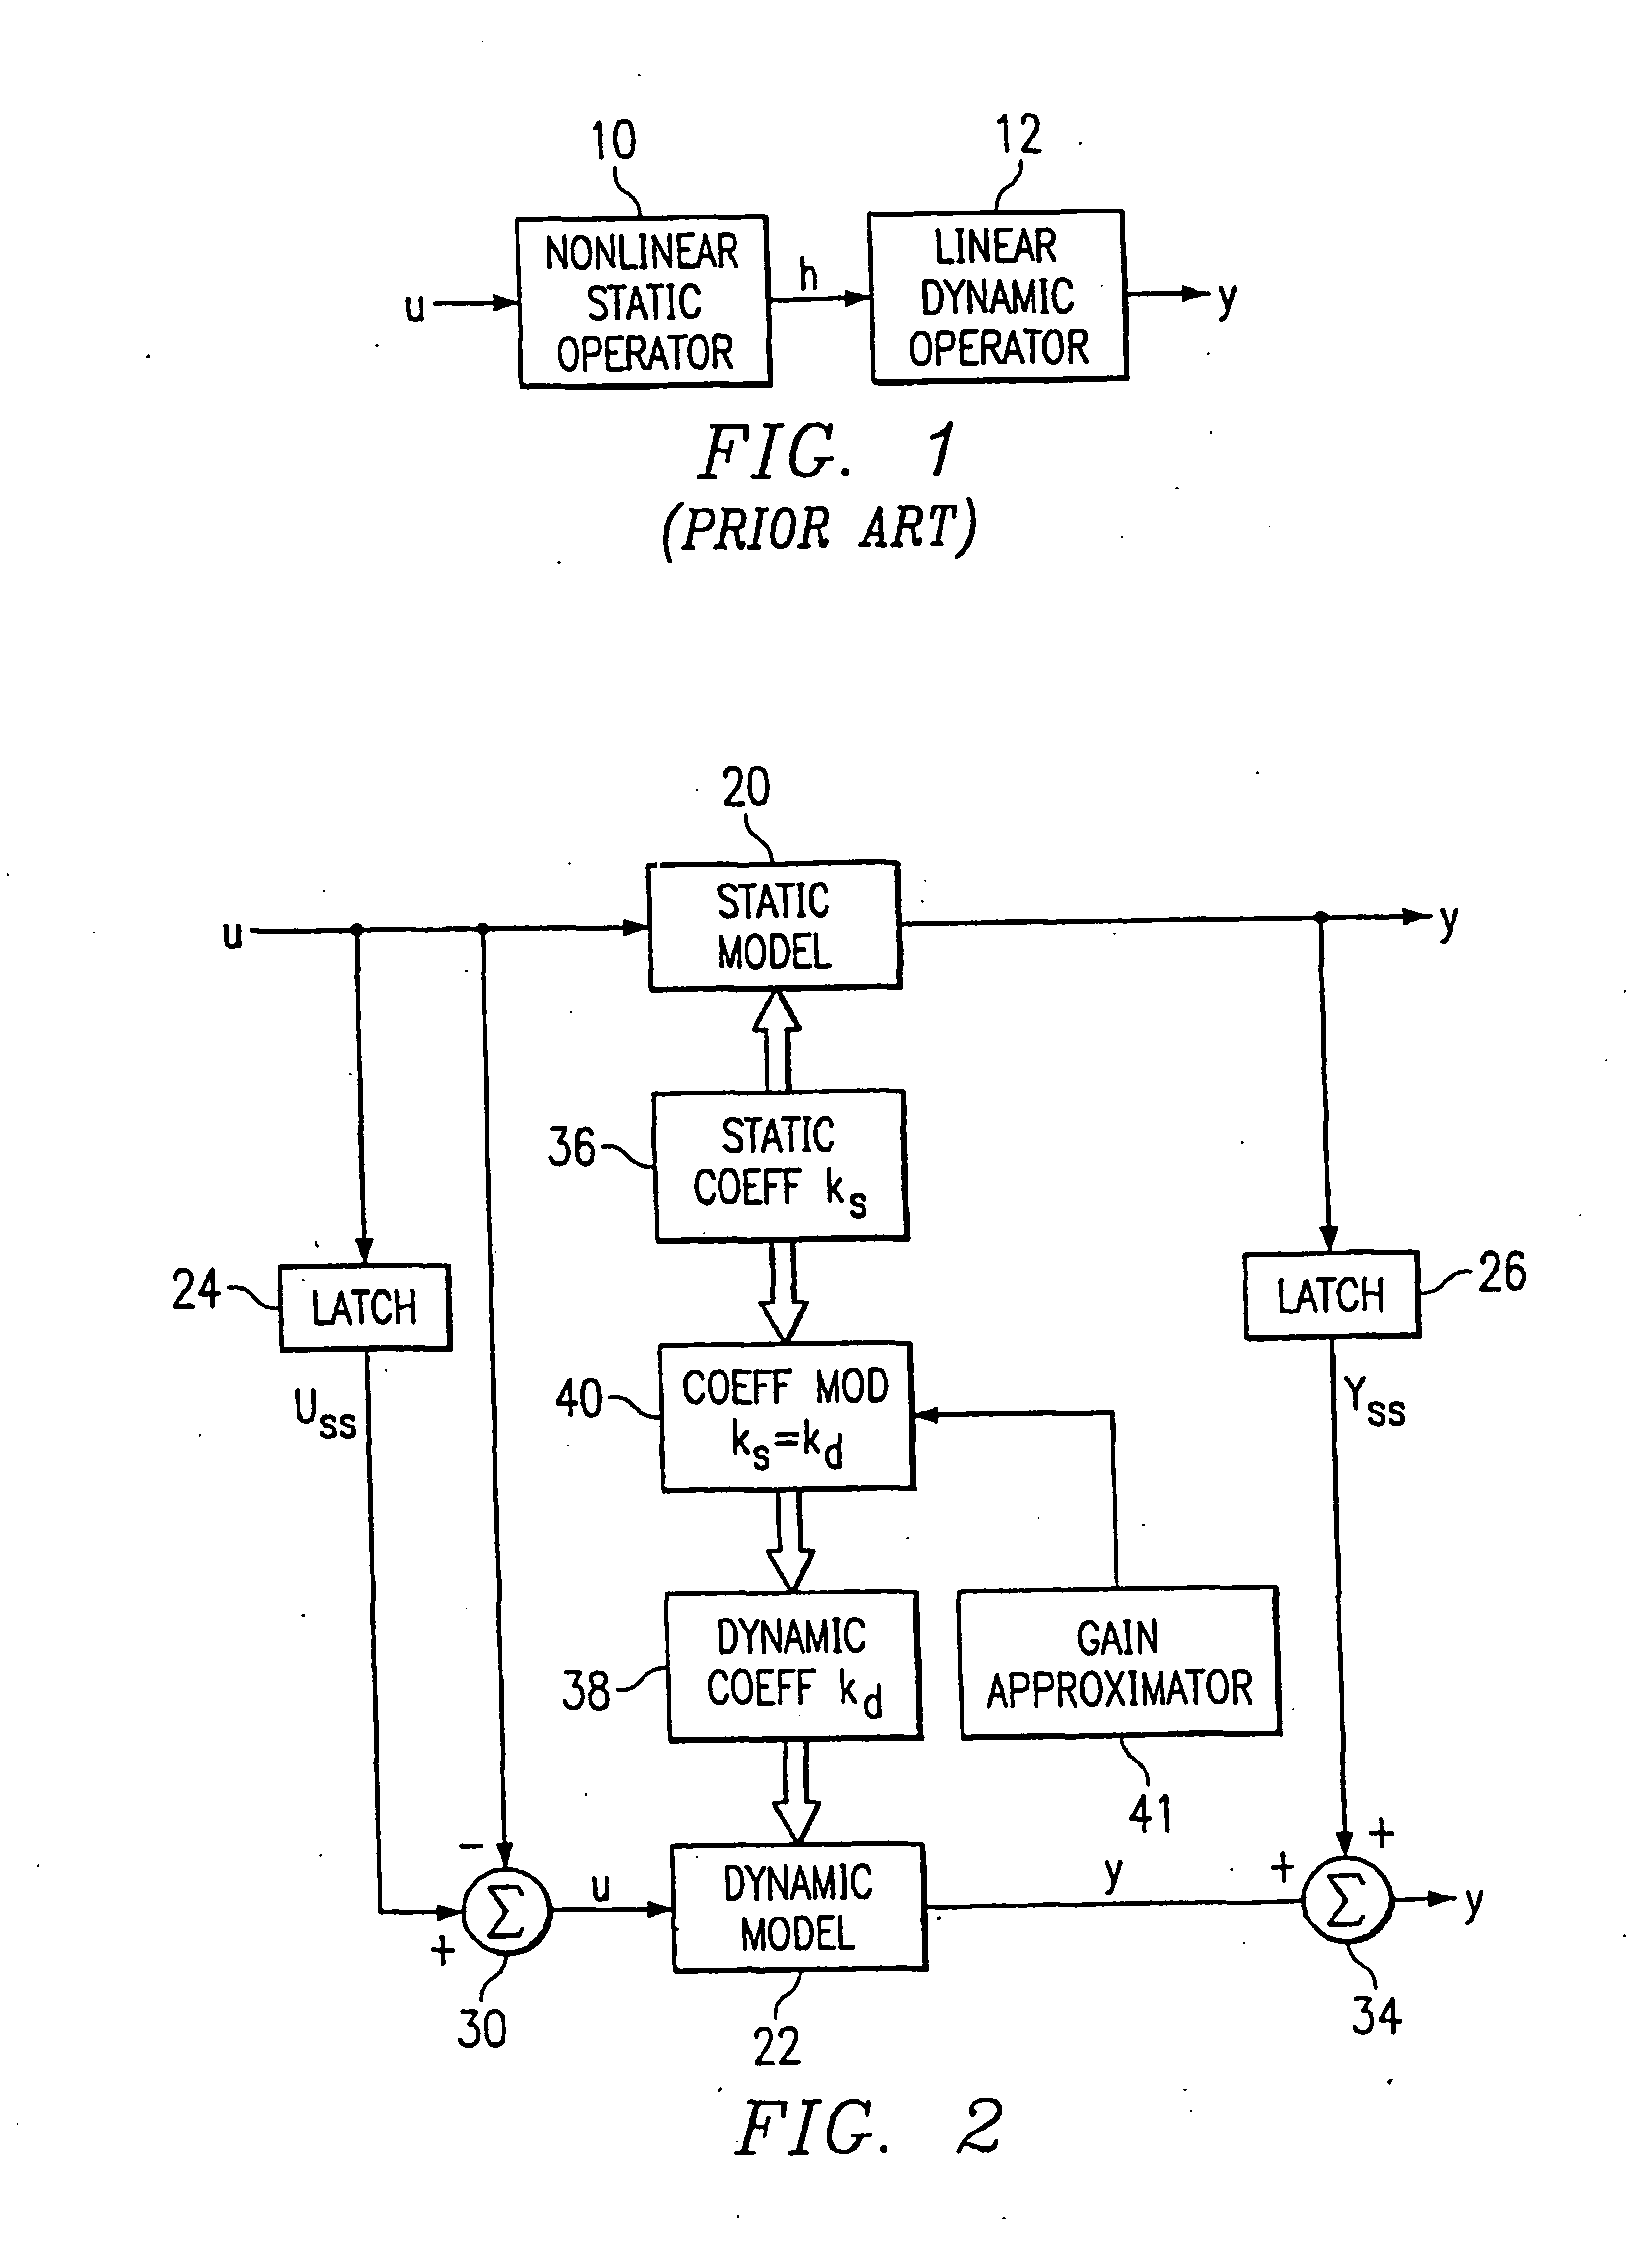 Method and apparatus for approximating gains in dynamic and steady-state processes for prediction, control, and optimization